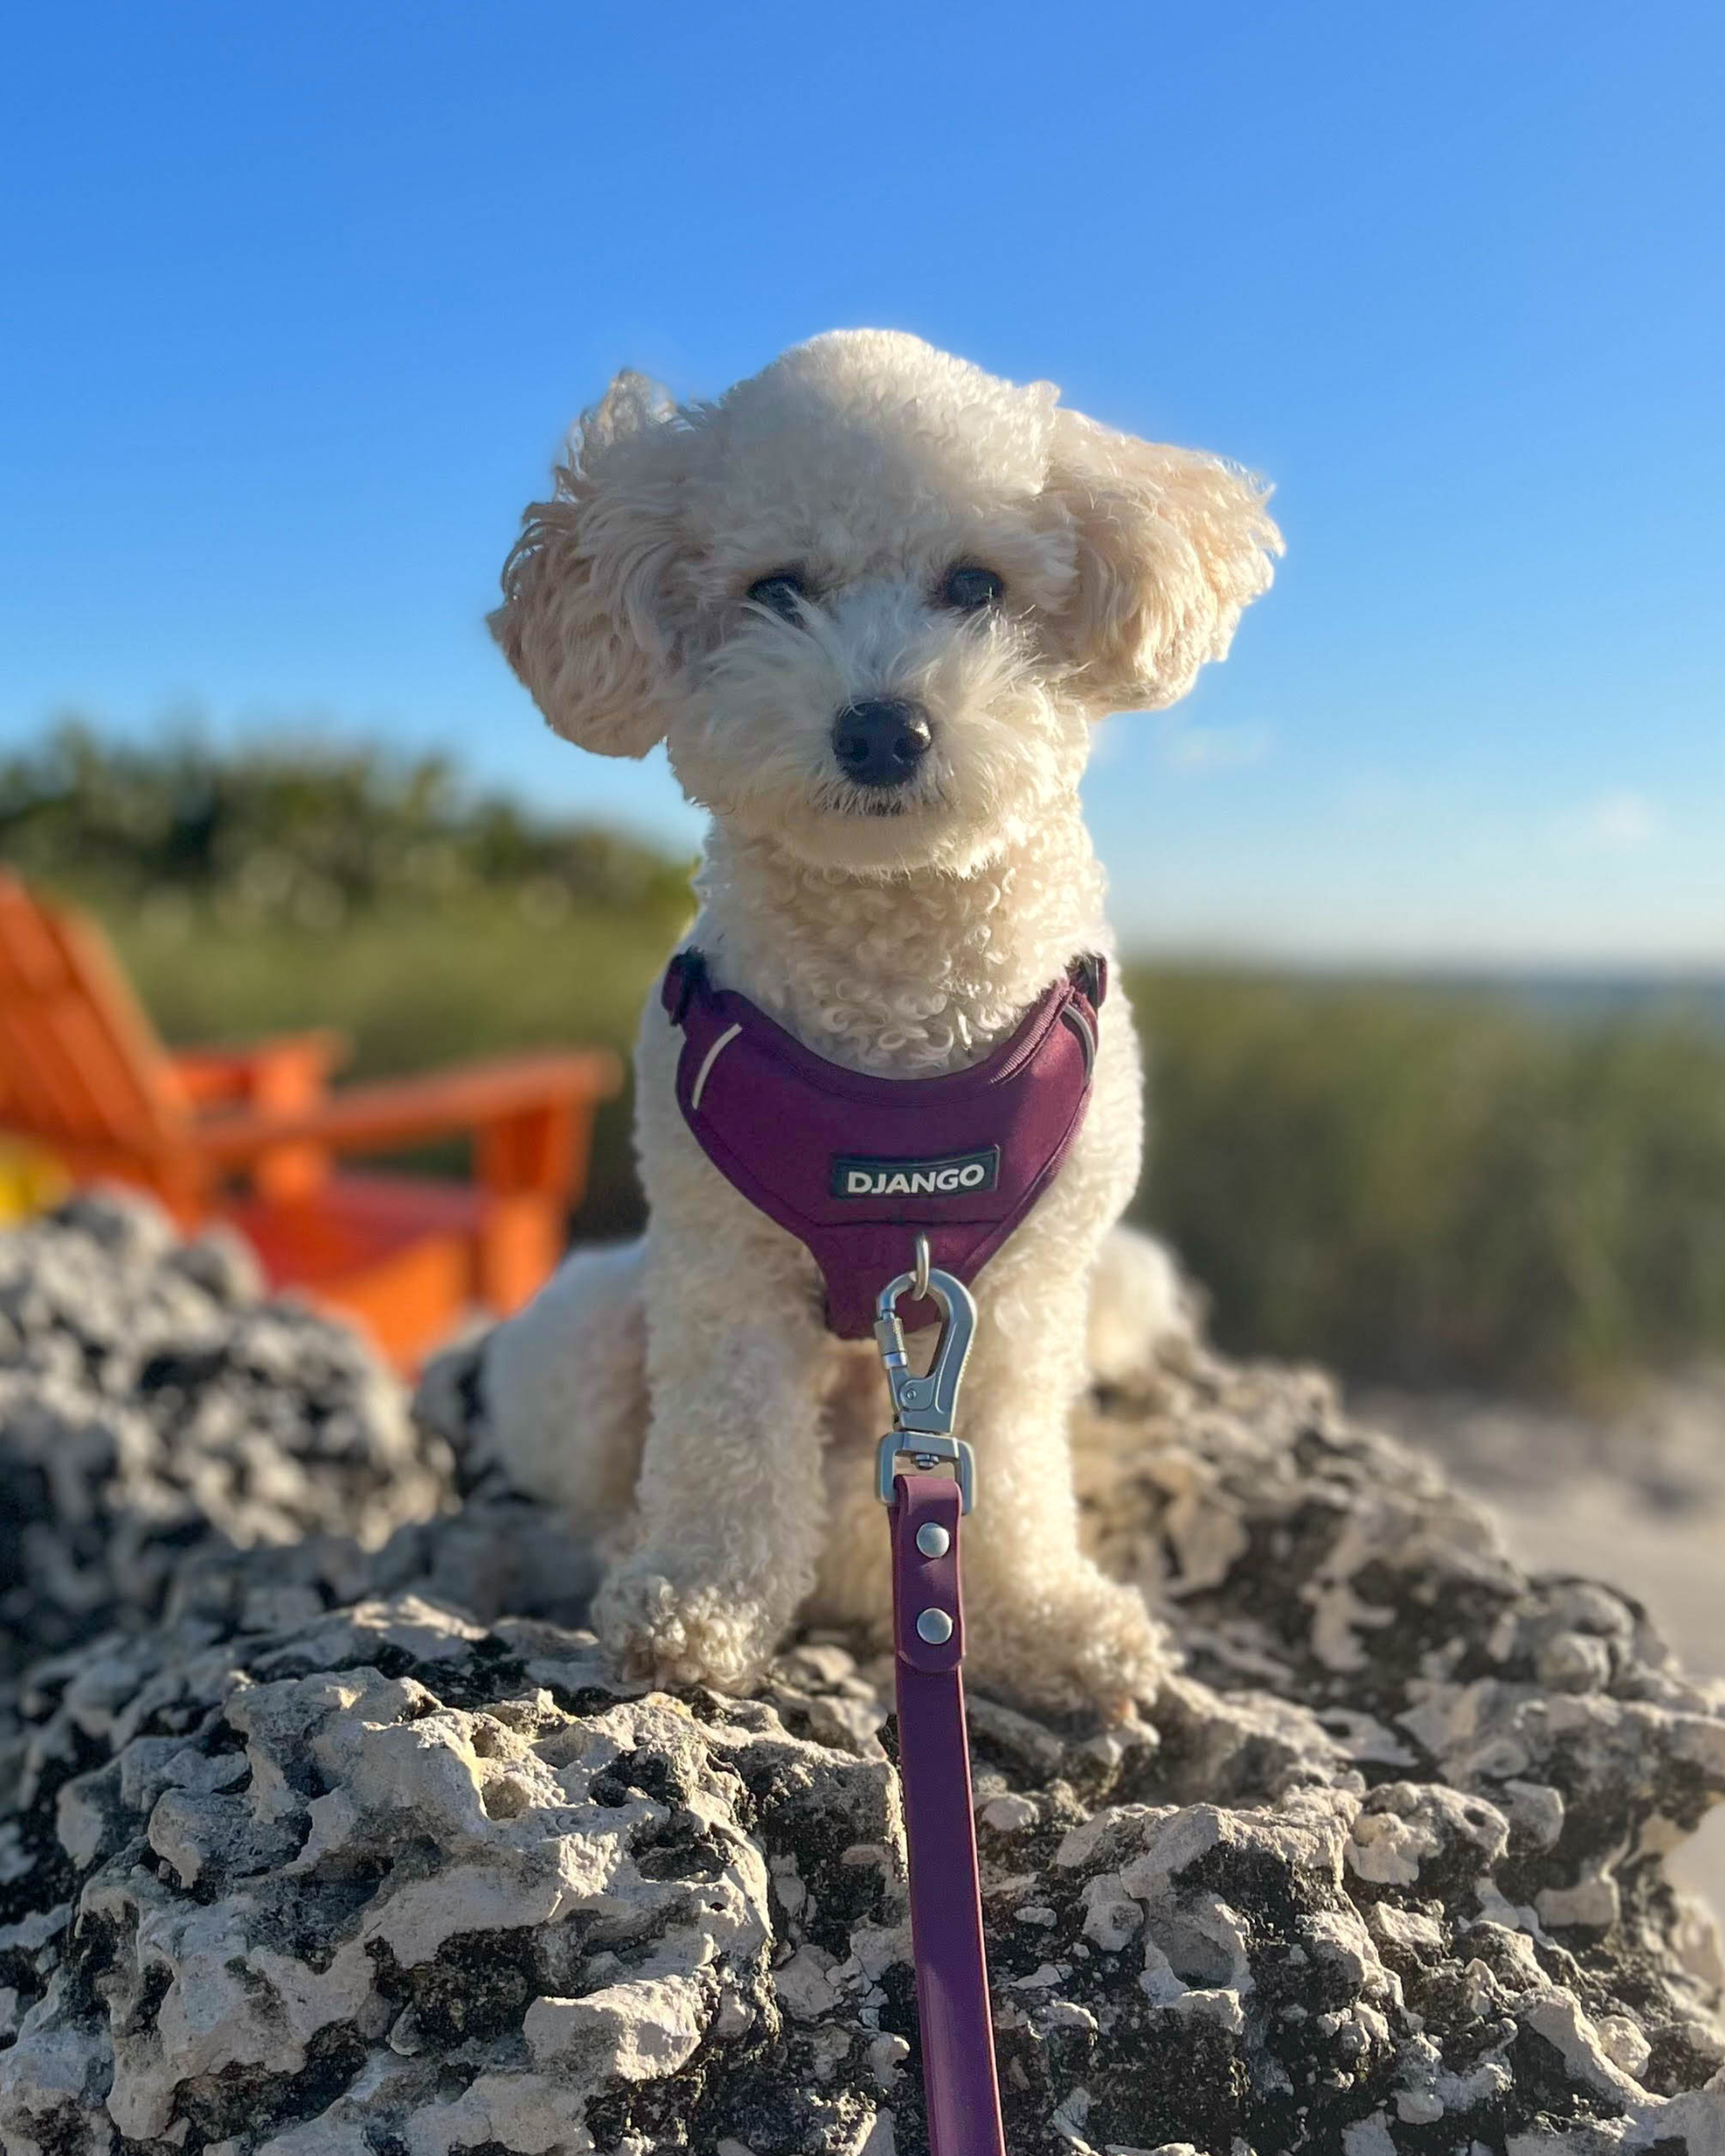 Coco is a F1B miniature Cockapoo who loves the beach and digging in the sand. Her DJANGO Tahoe Dog Leash is waterproof, odorproof, dirt-resistant, and perfect for all beach adventures - djangobrand.com